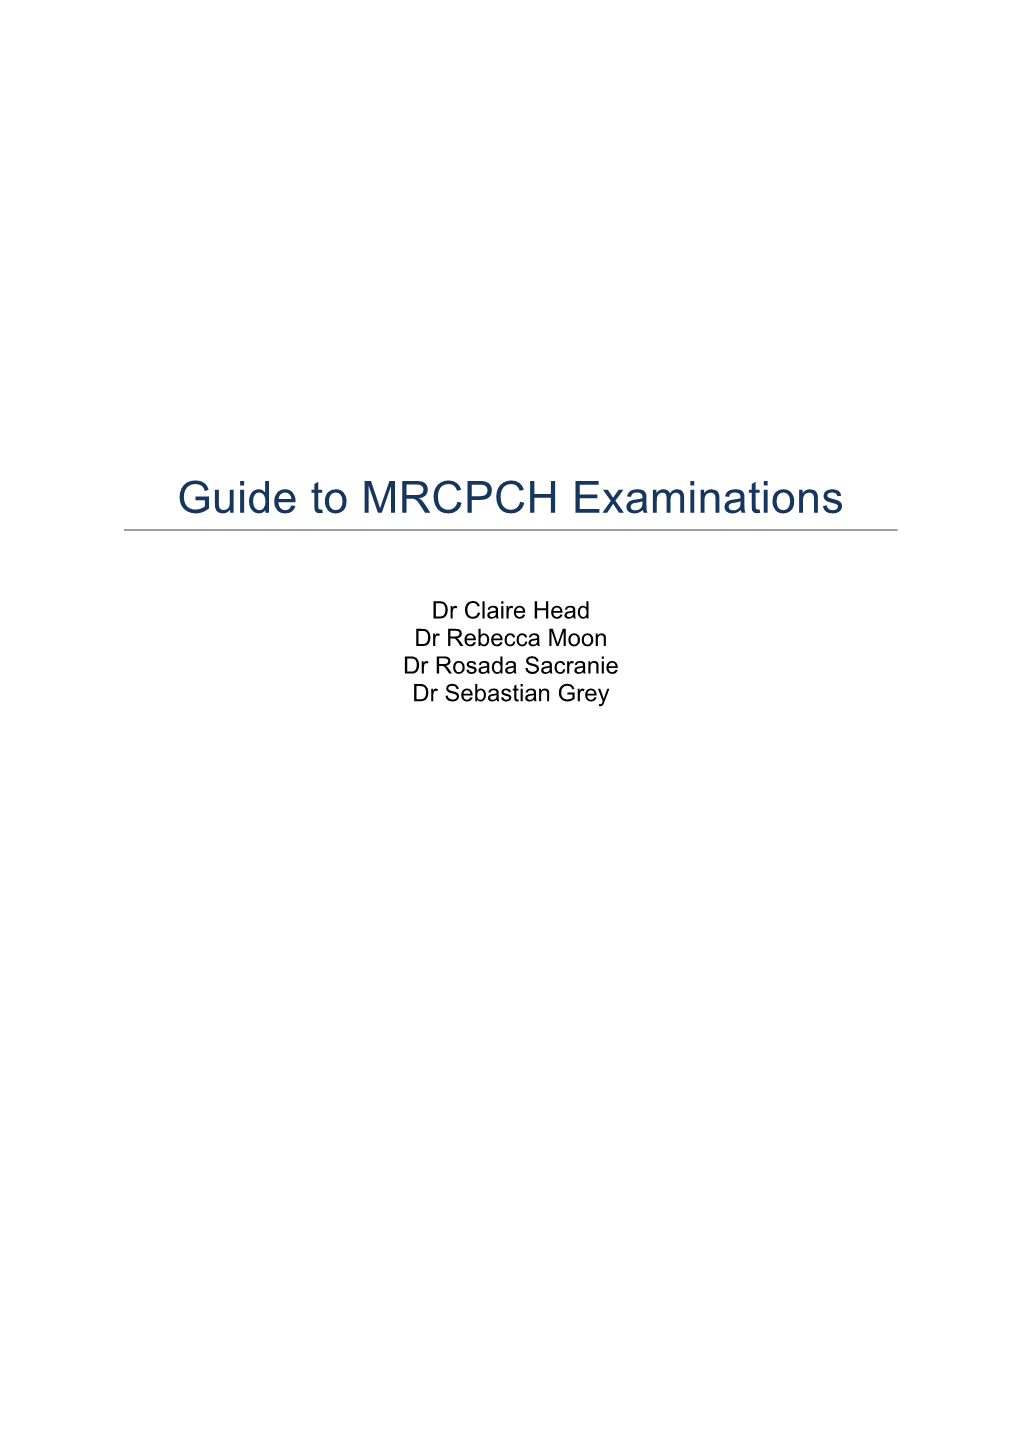 Guide to MRCPCH Examinations